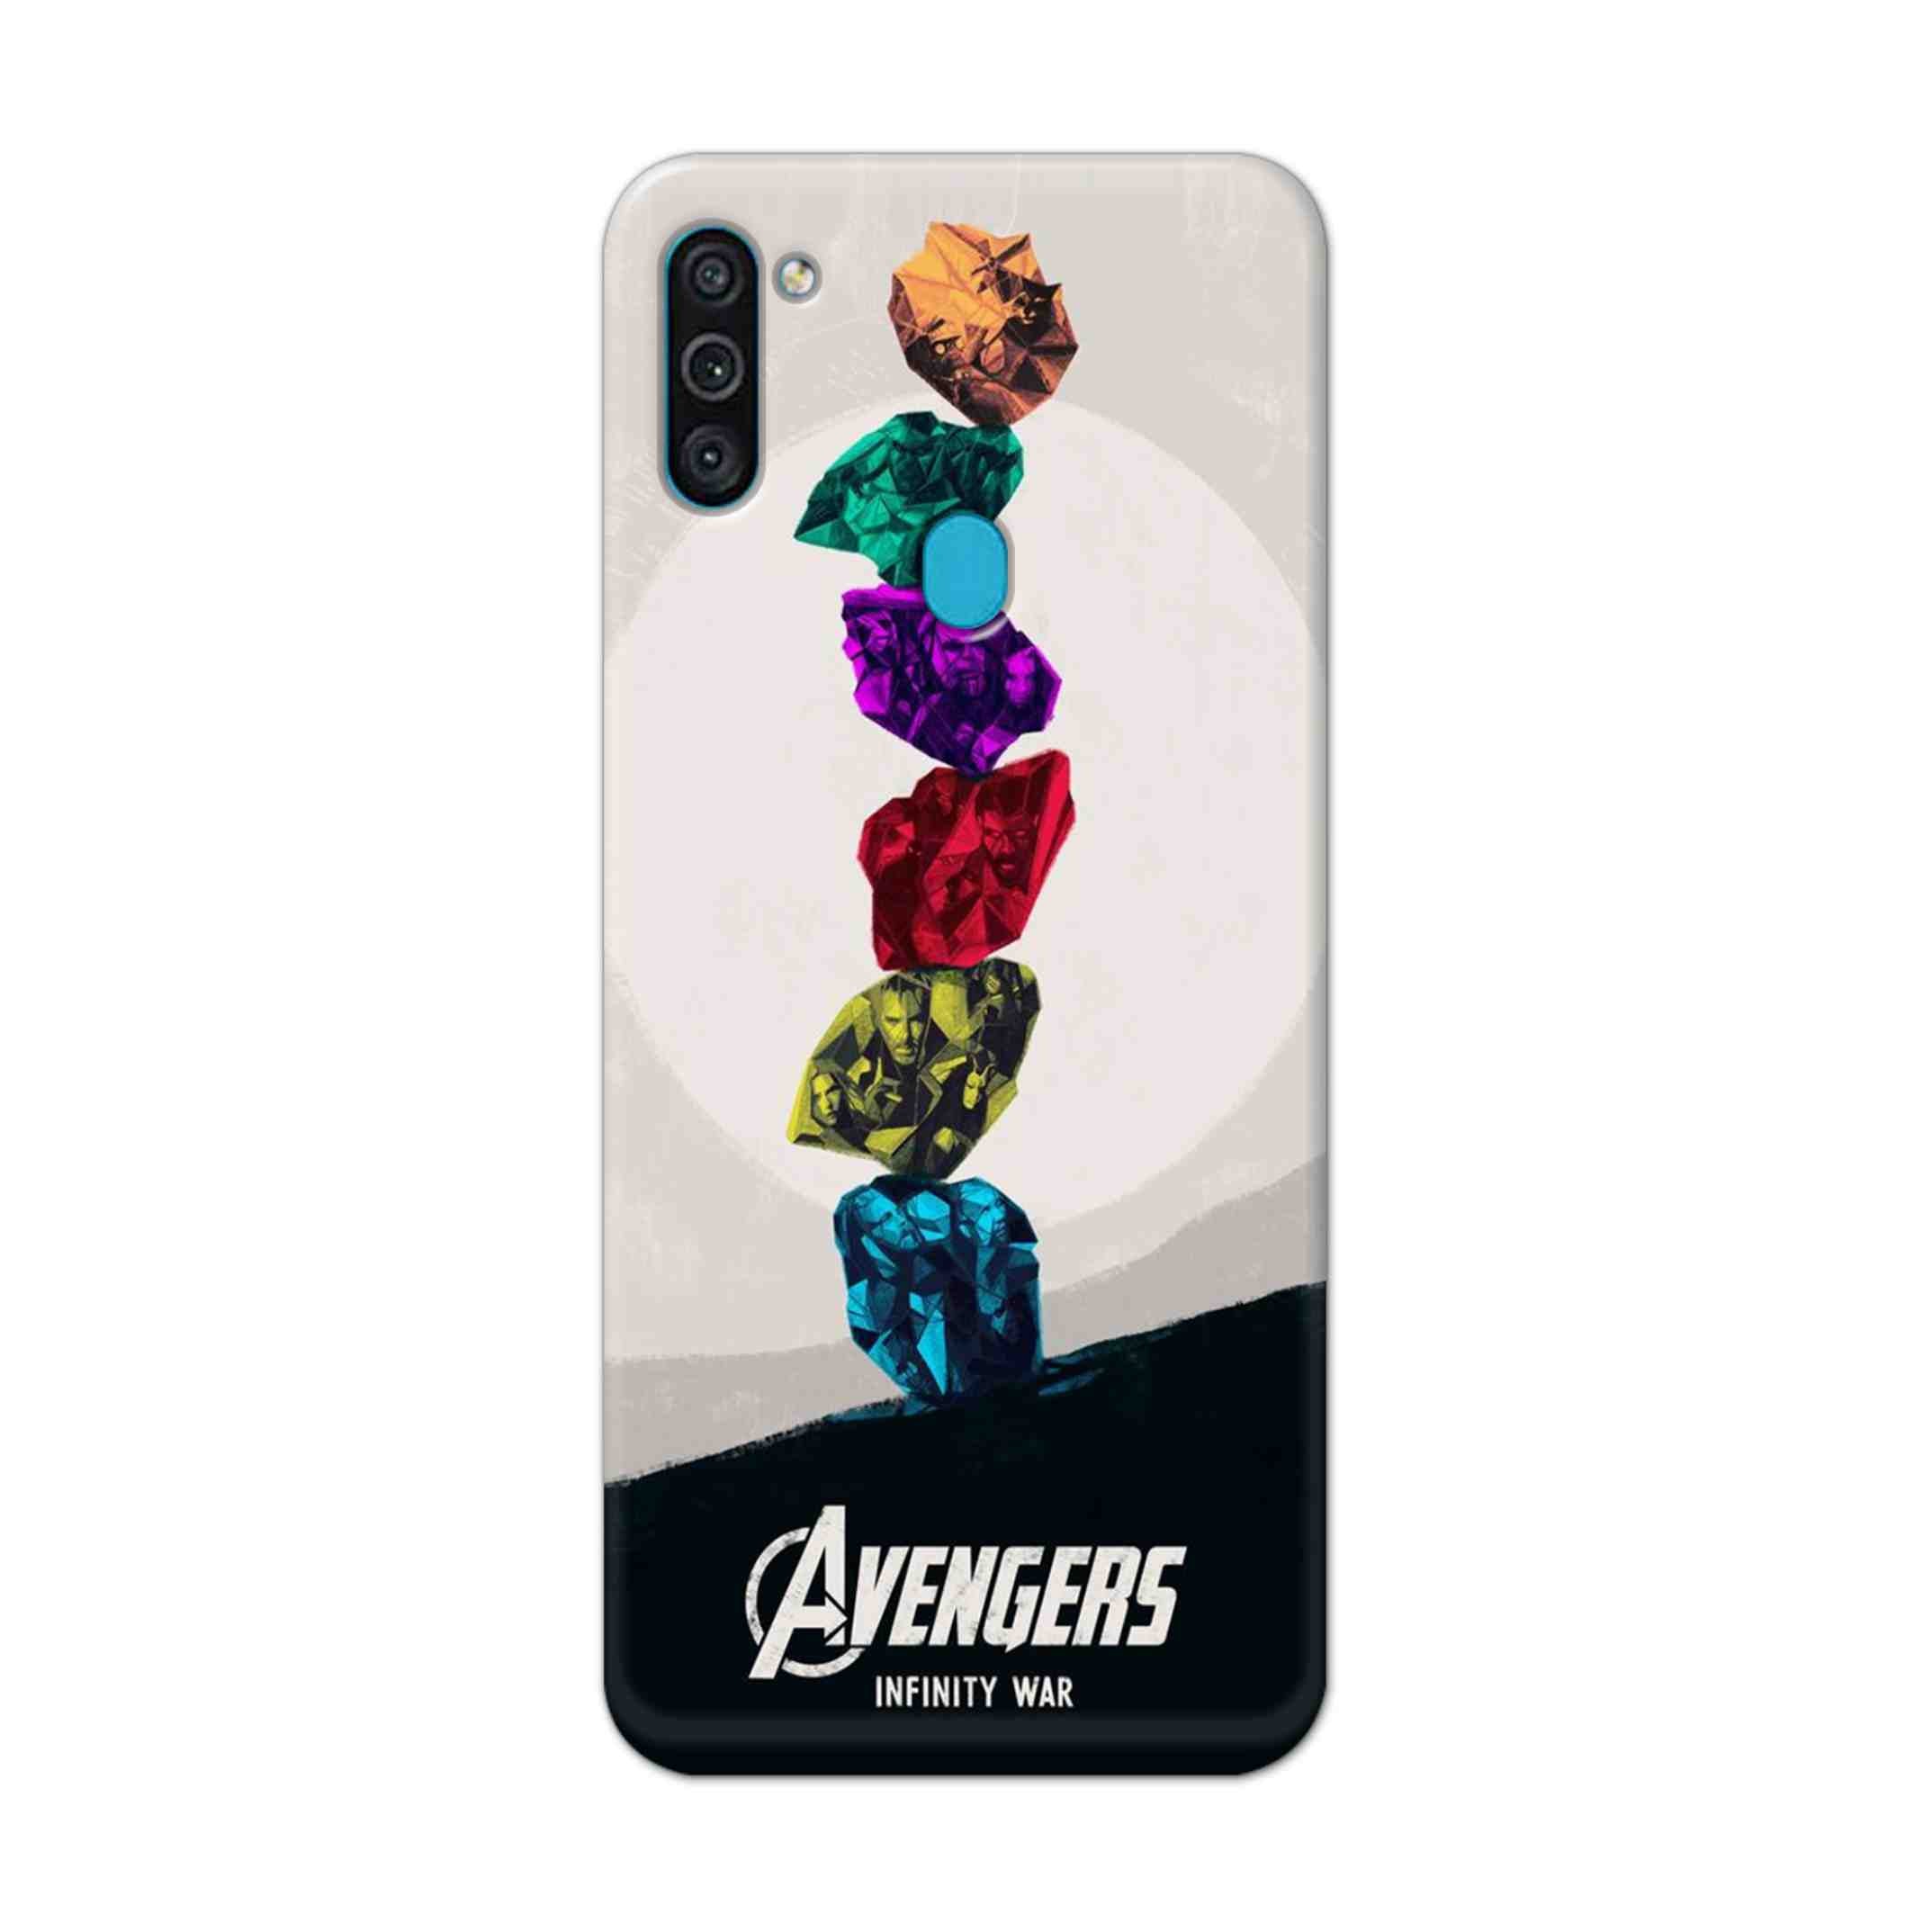 Buy Avengers Stone Hard Back Mobile Phone Case Cover For Samsung Galaxy M11 Online